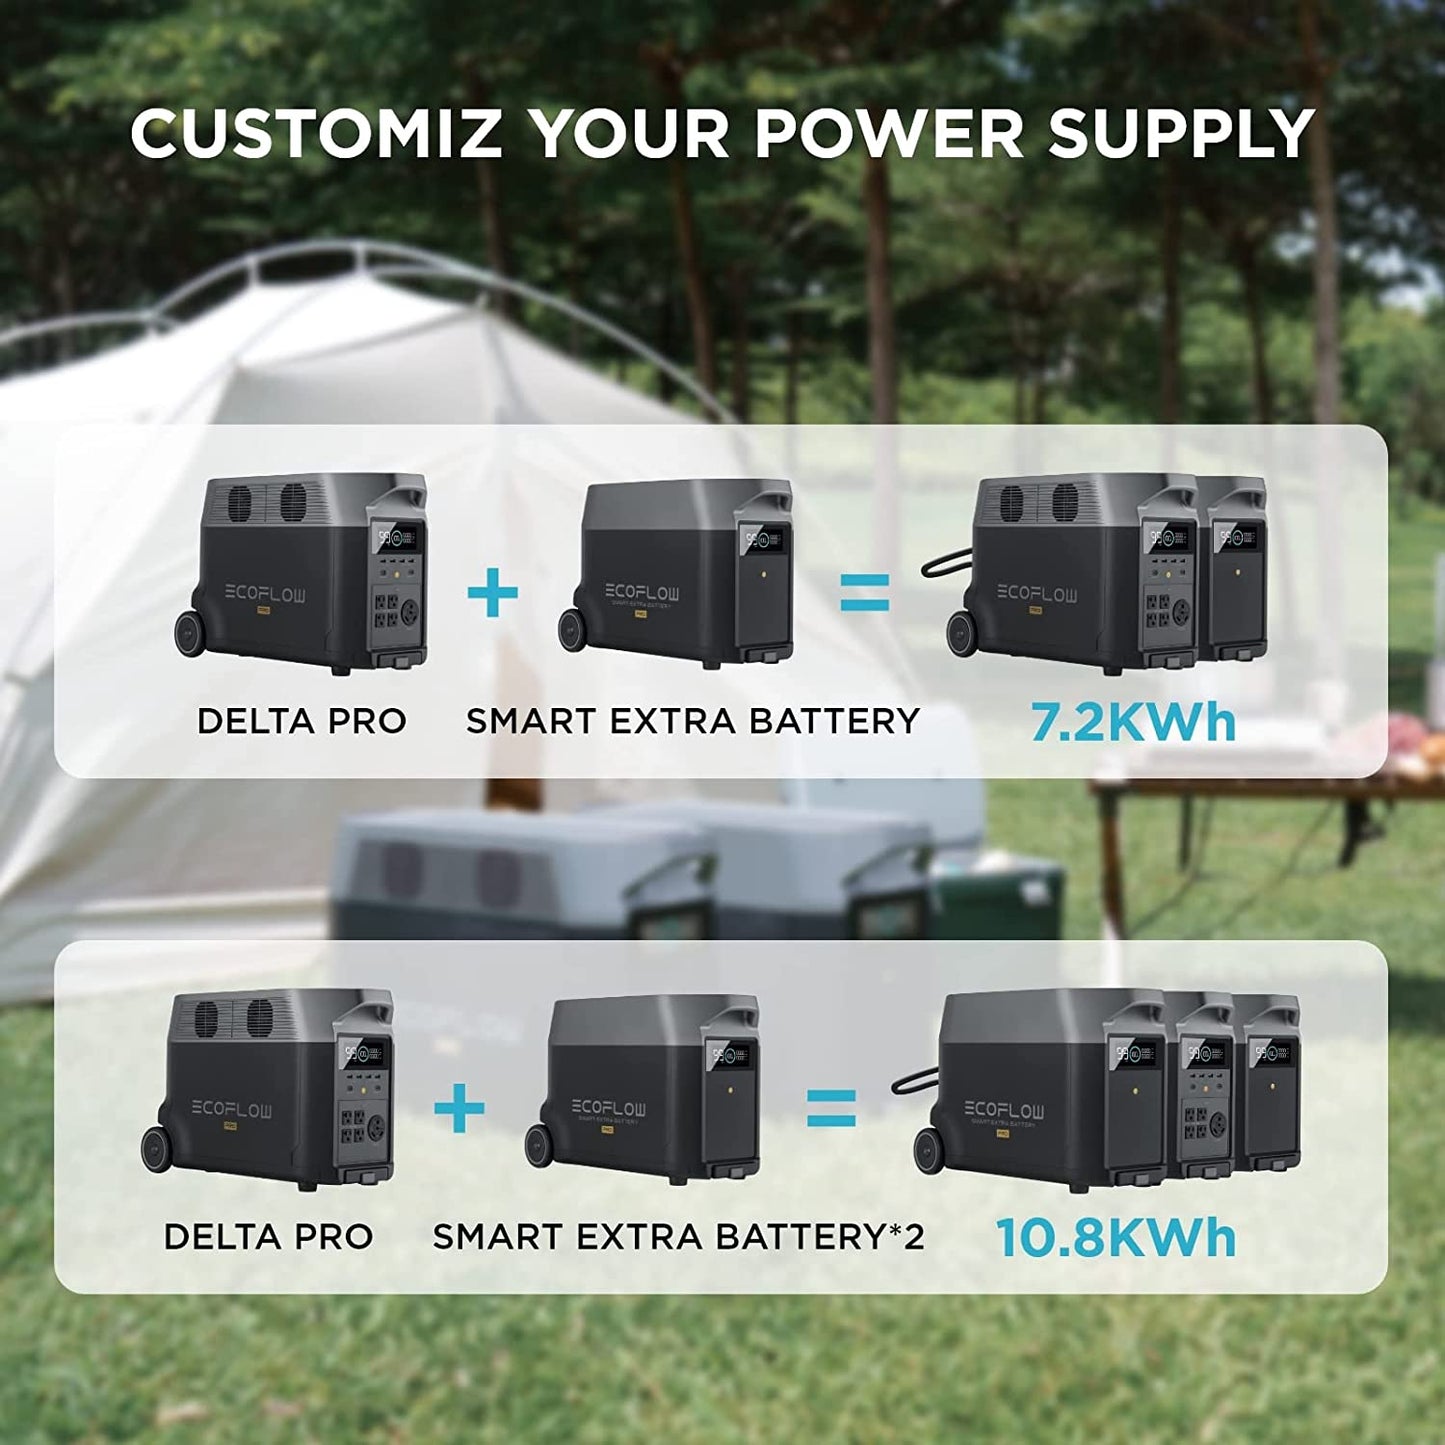 EF ECOFLOW DELTA Pro 7.2KWh/3600W Home Backup Power, Solar Generator with DELTA Pro Smart Extra Battery, Portable Power Station With Handle&Wheels for Home Backup Outdoors RV High-Power Appliances Emergency